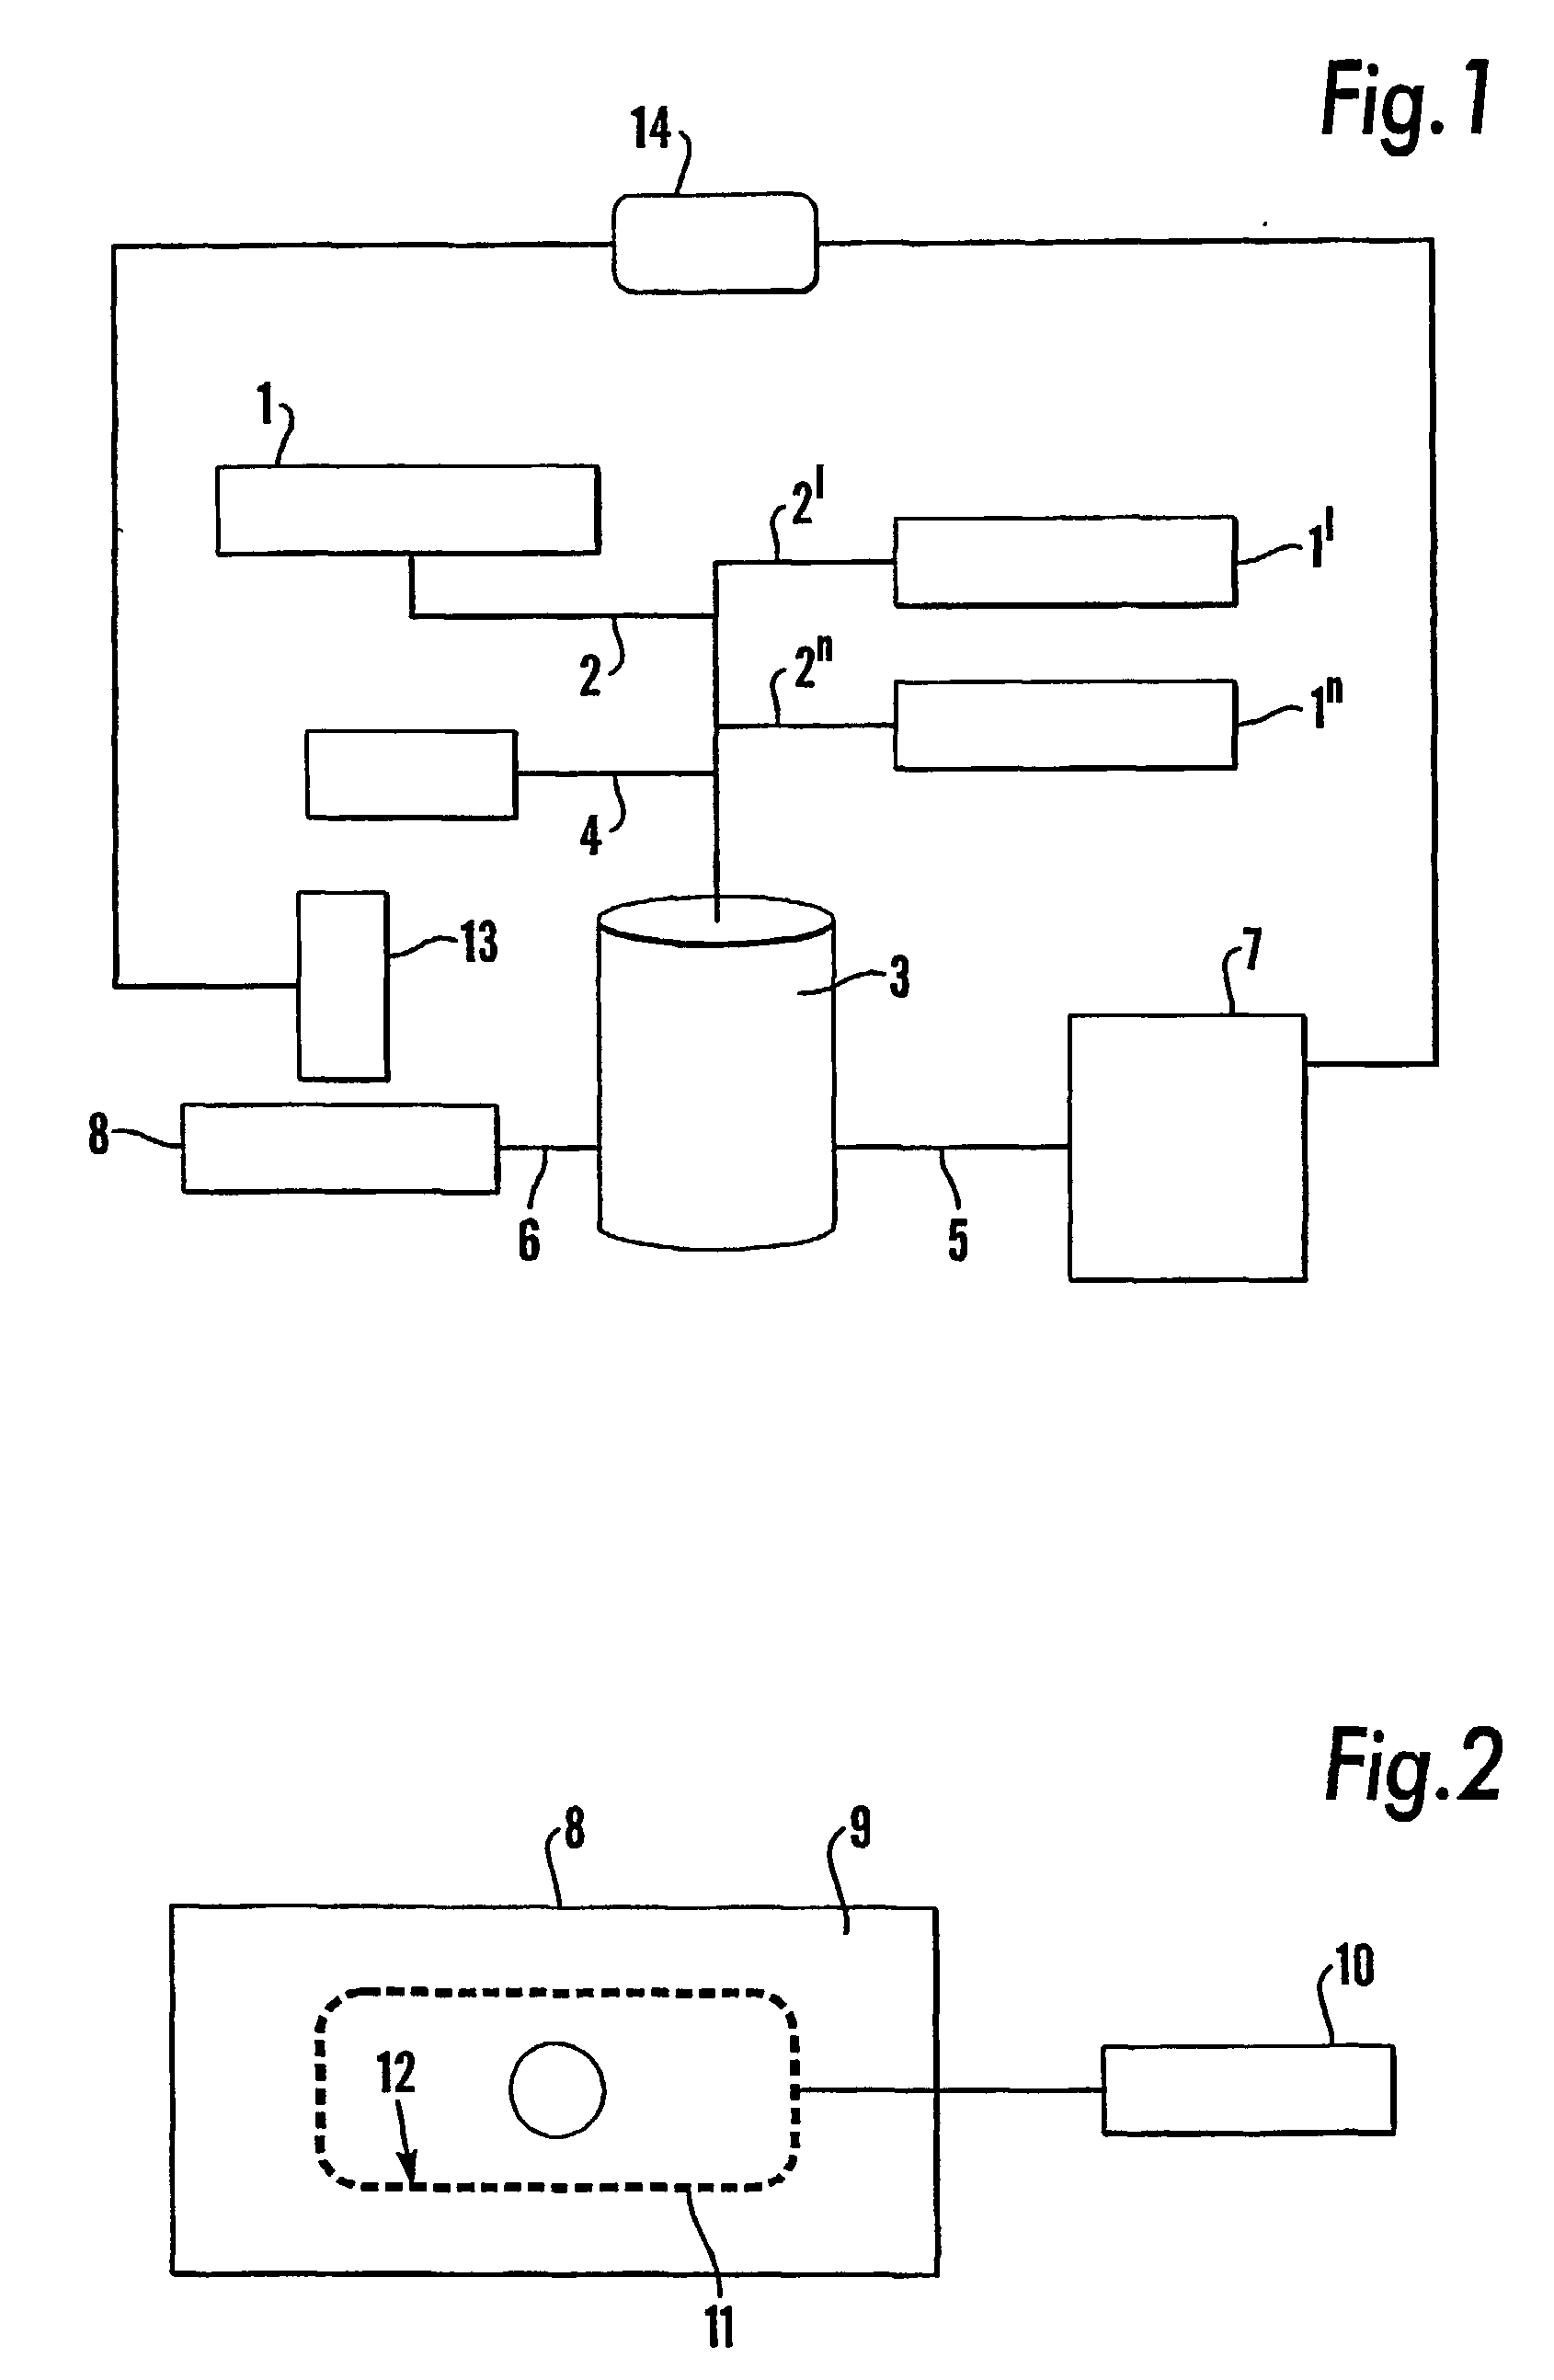 Method in connection with the production of pulp, paper or paperboard